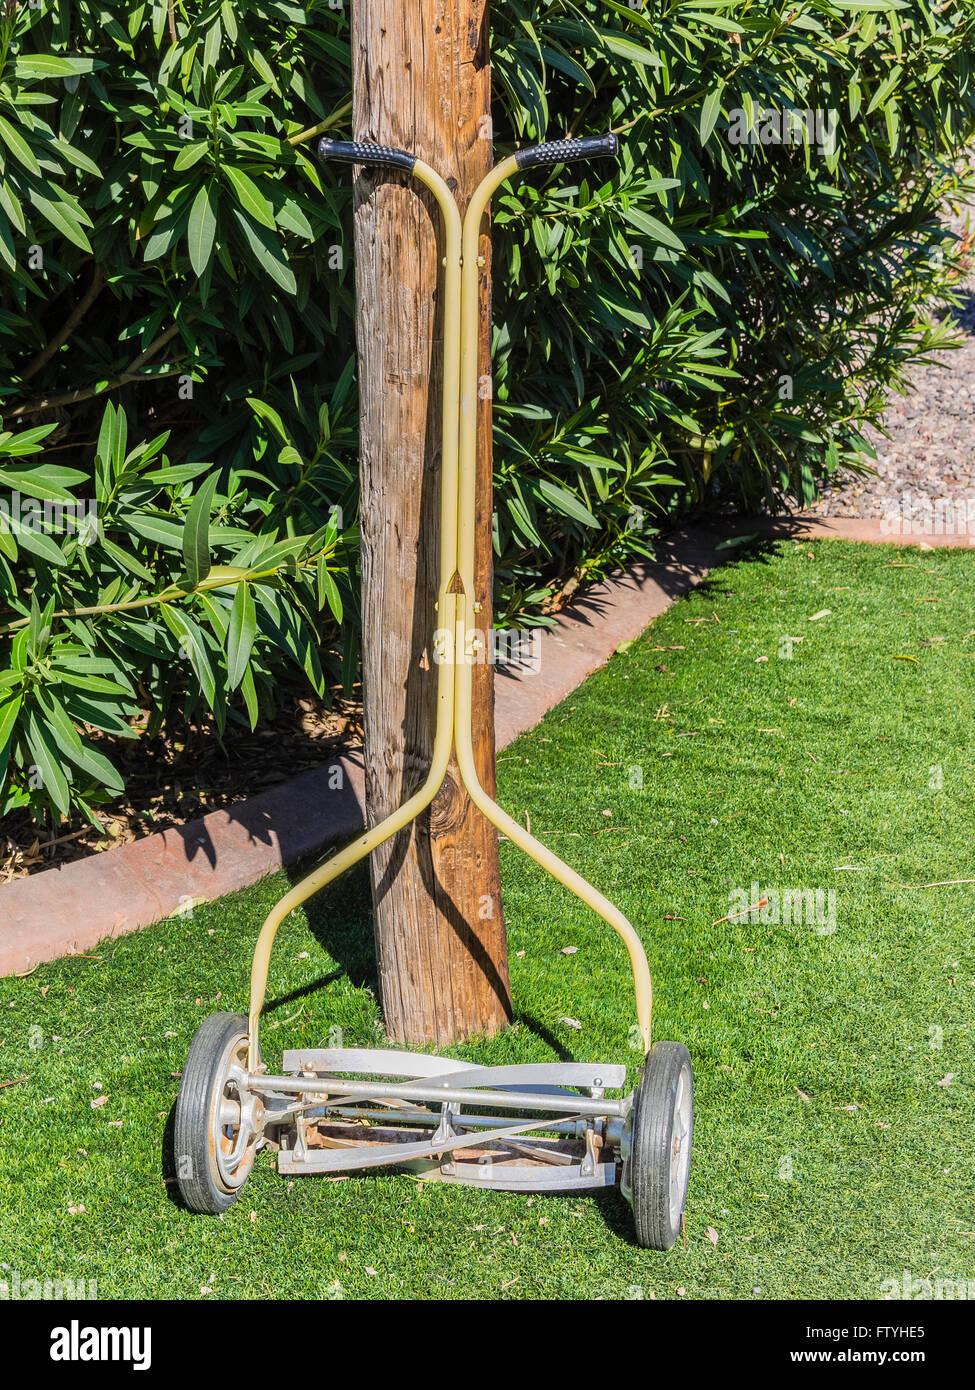 Antique reel type lawn mower leaning against a telephone pole